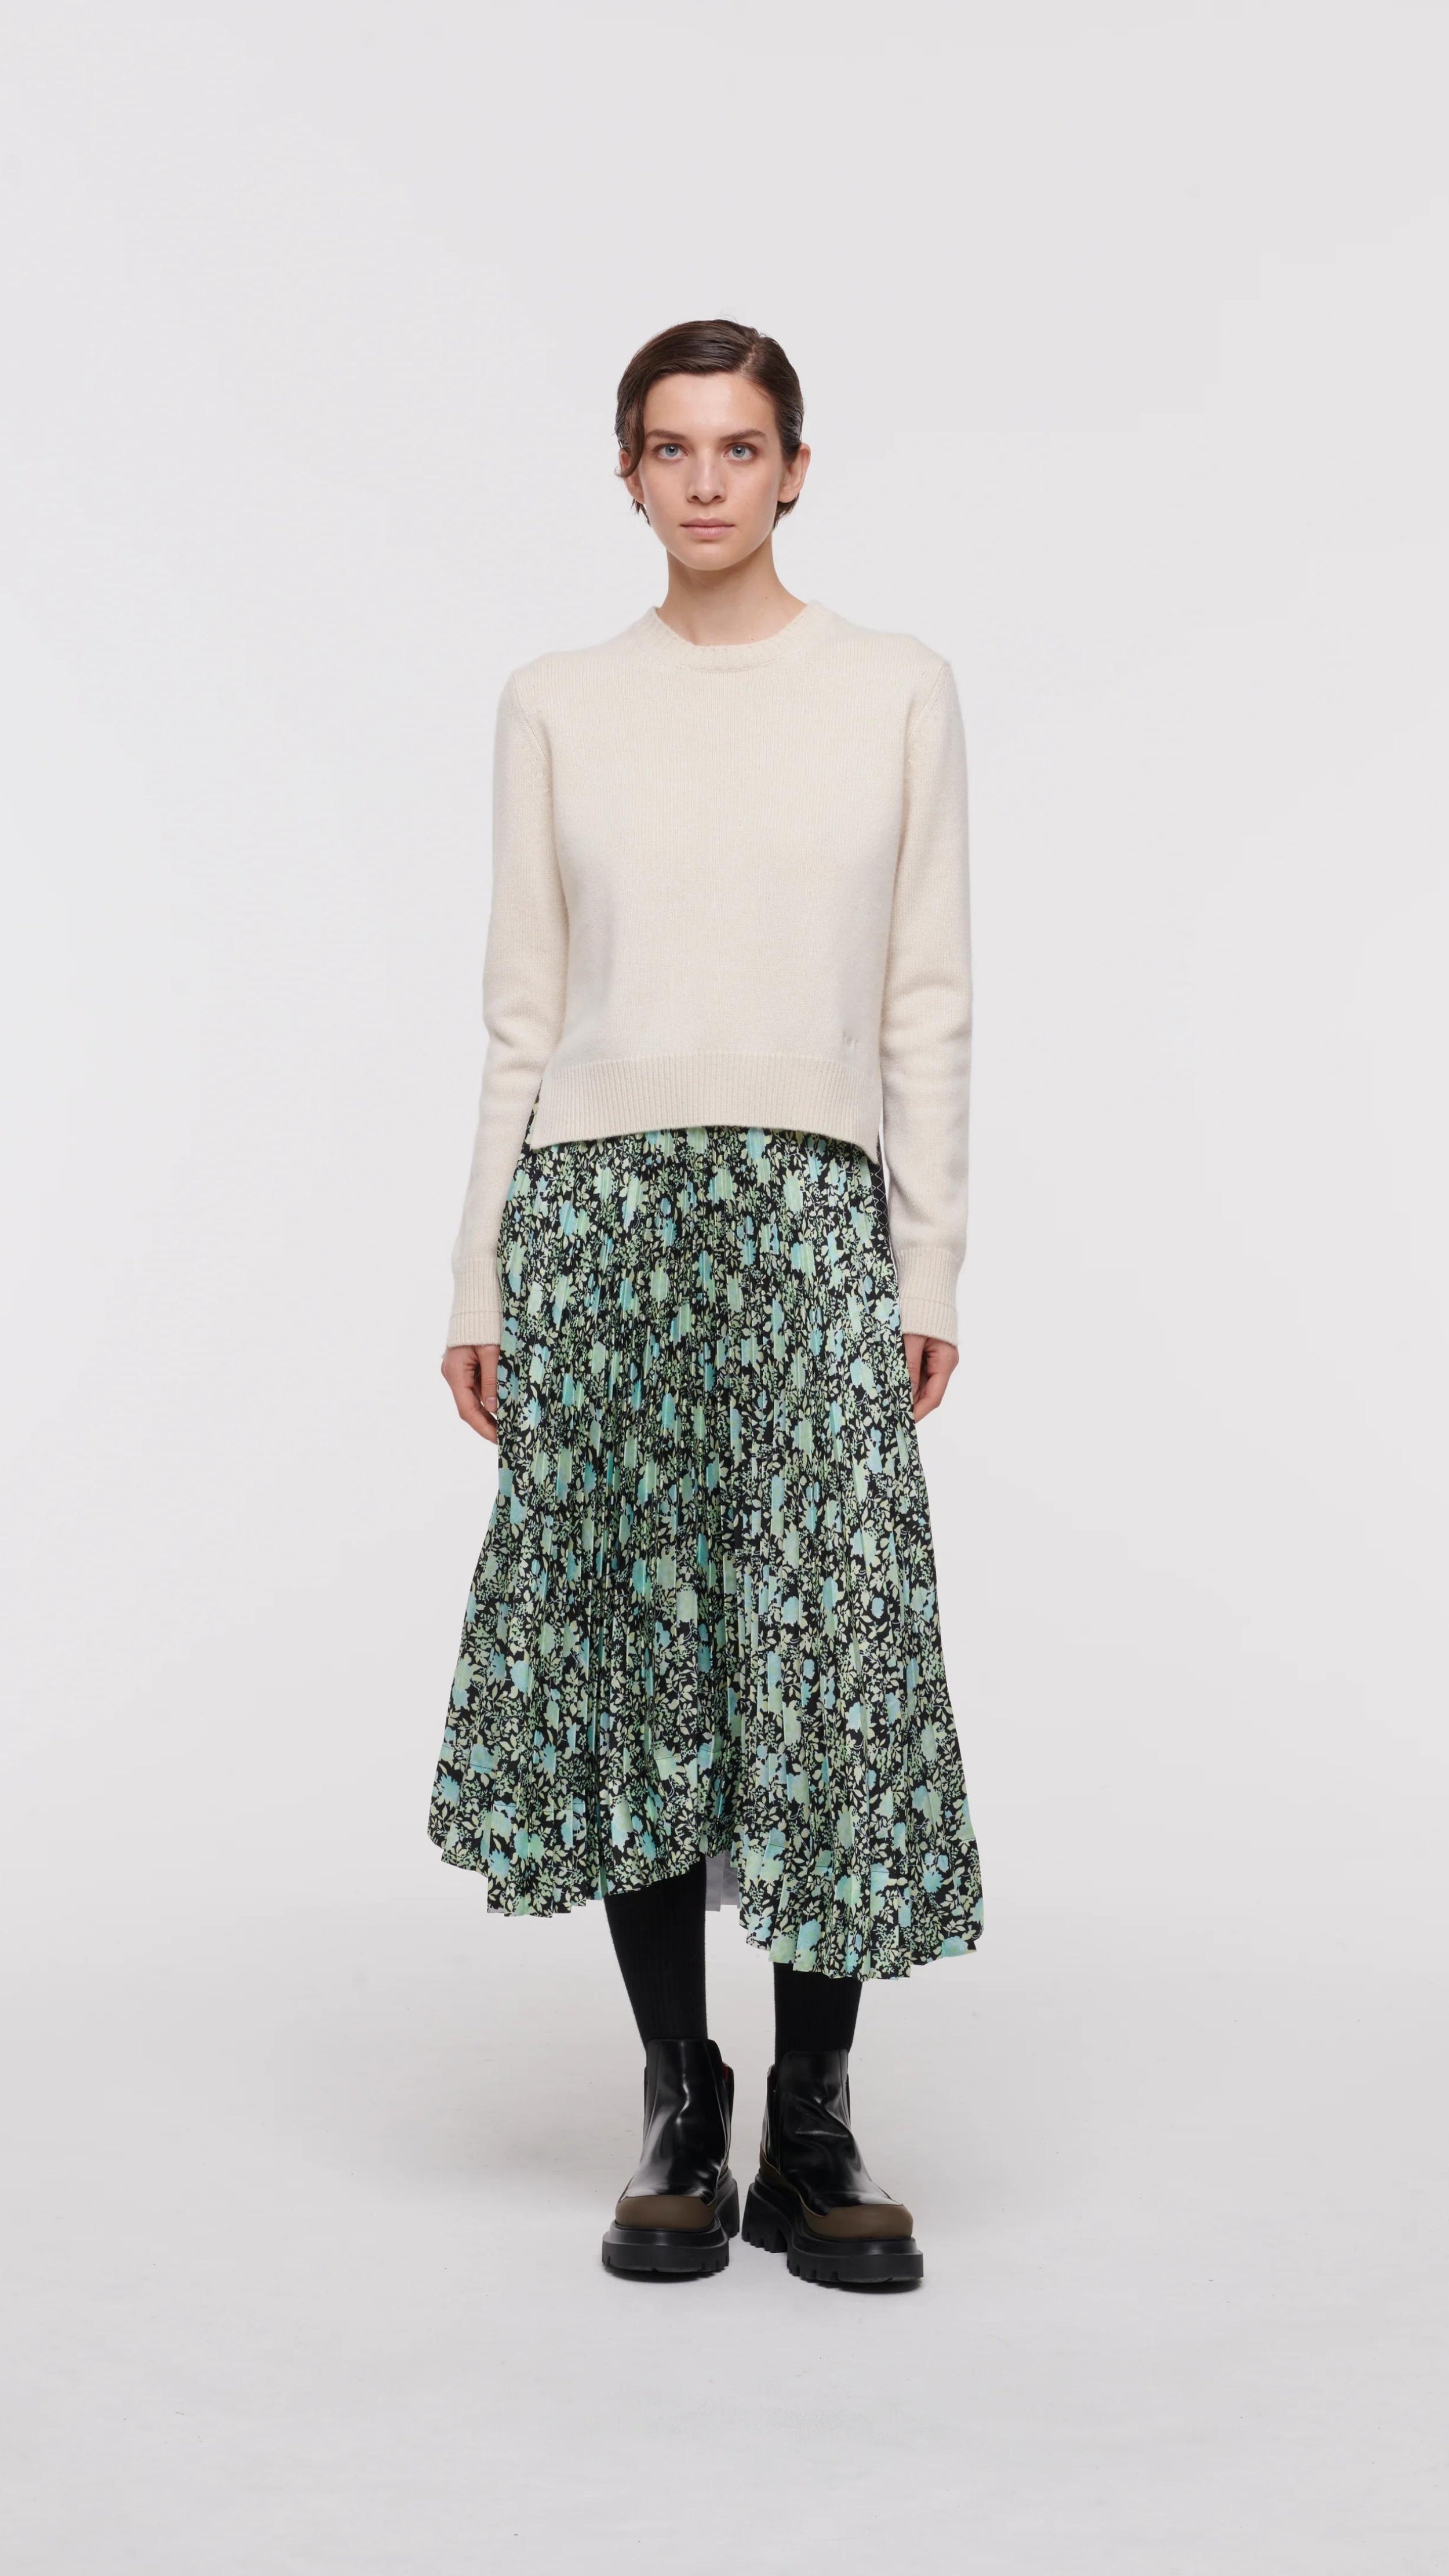 Plan C Pleated Midi Skirt in Backlit Dahlia Print.  Featuring alternating geometrical and flower prints, a slender pleated front, and larger pleating on the back, this skirt falls to a midi length asymmetric hem. The elasticated waist offers perfect comfort and easy fitting. Model wearing the skirt facing front.